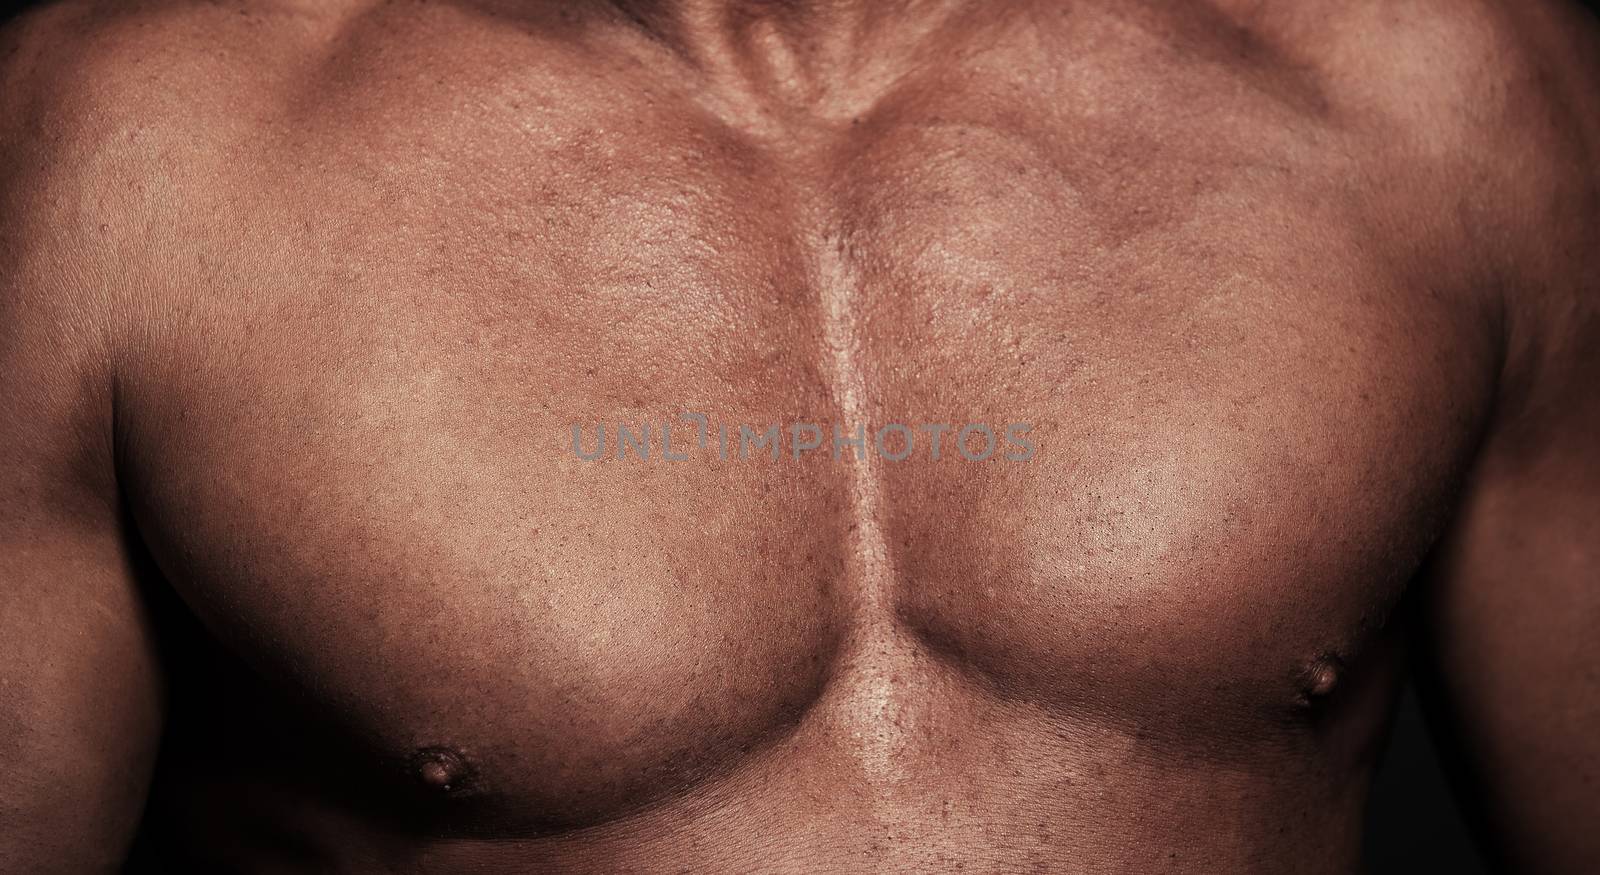 Close-up view on a muscular body. Topless man